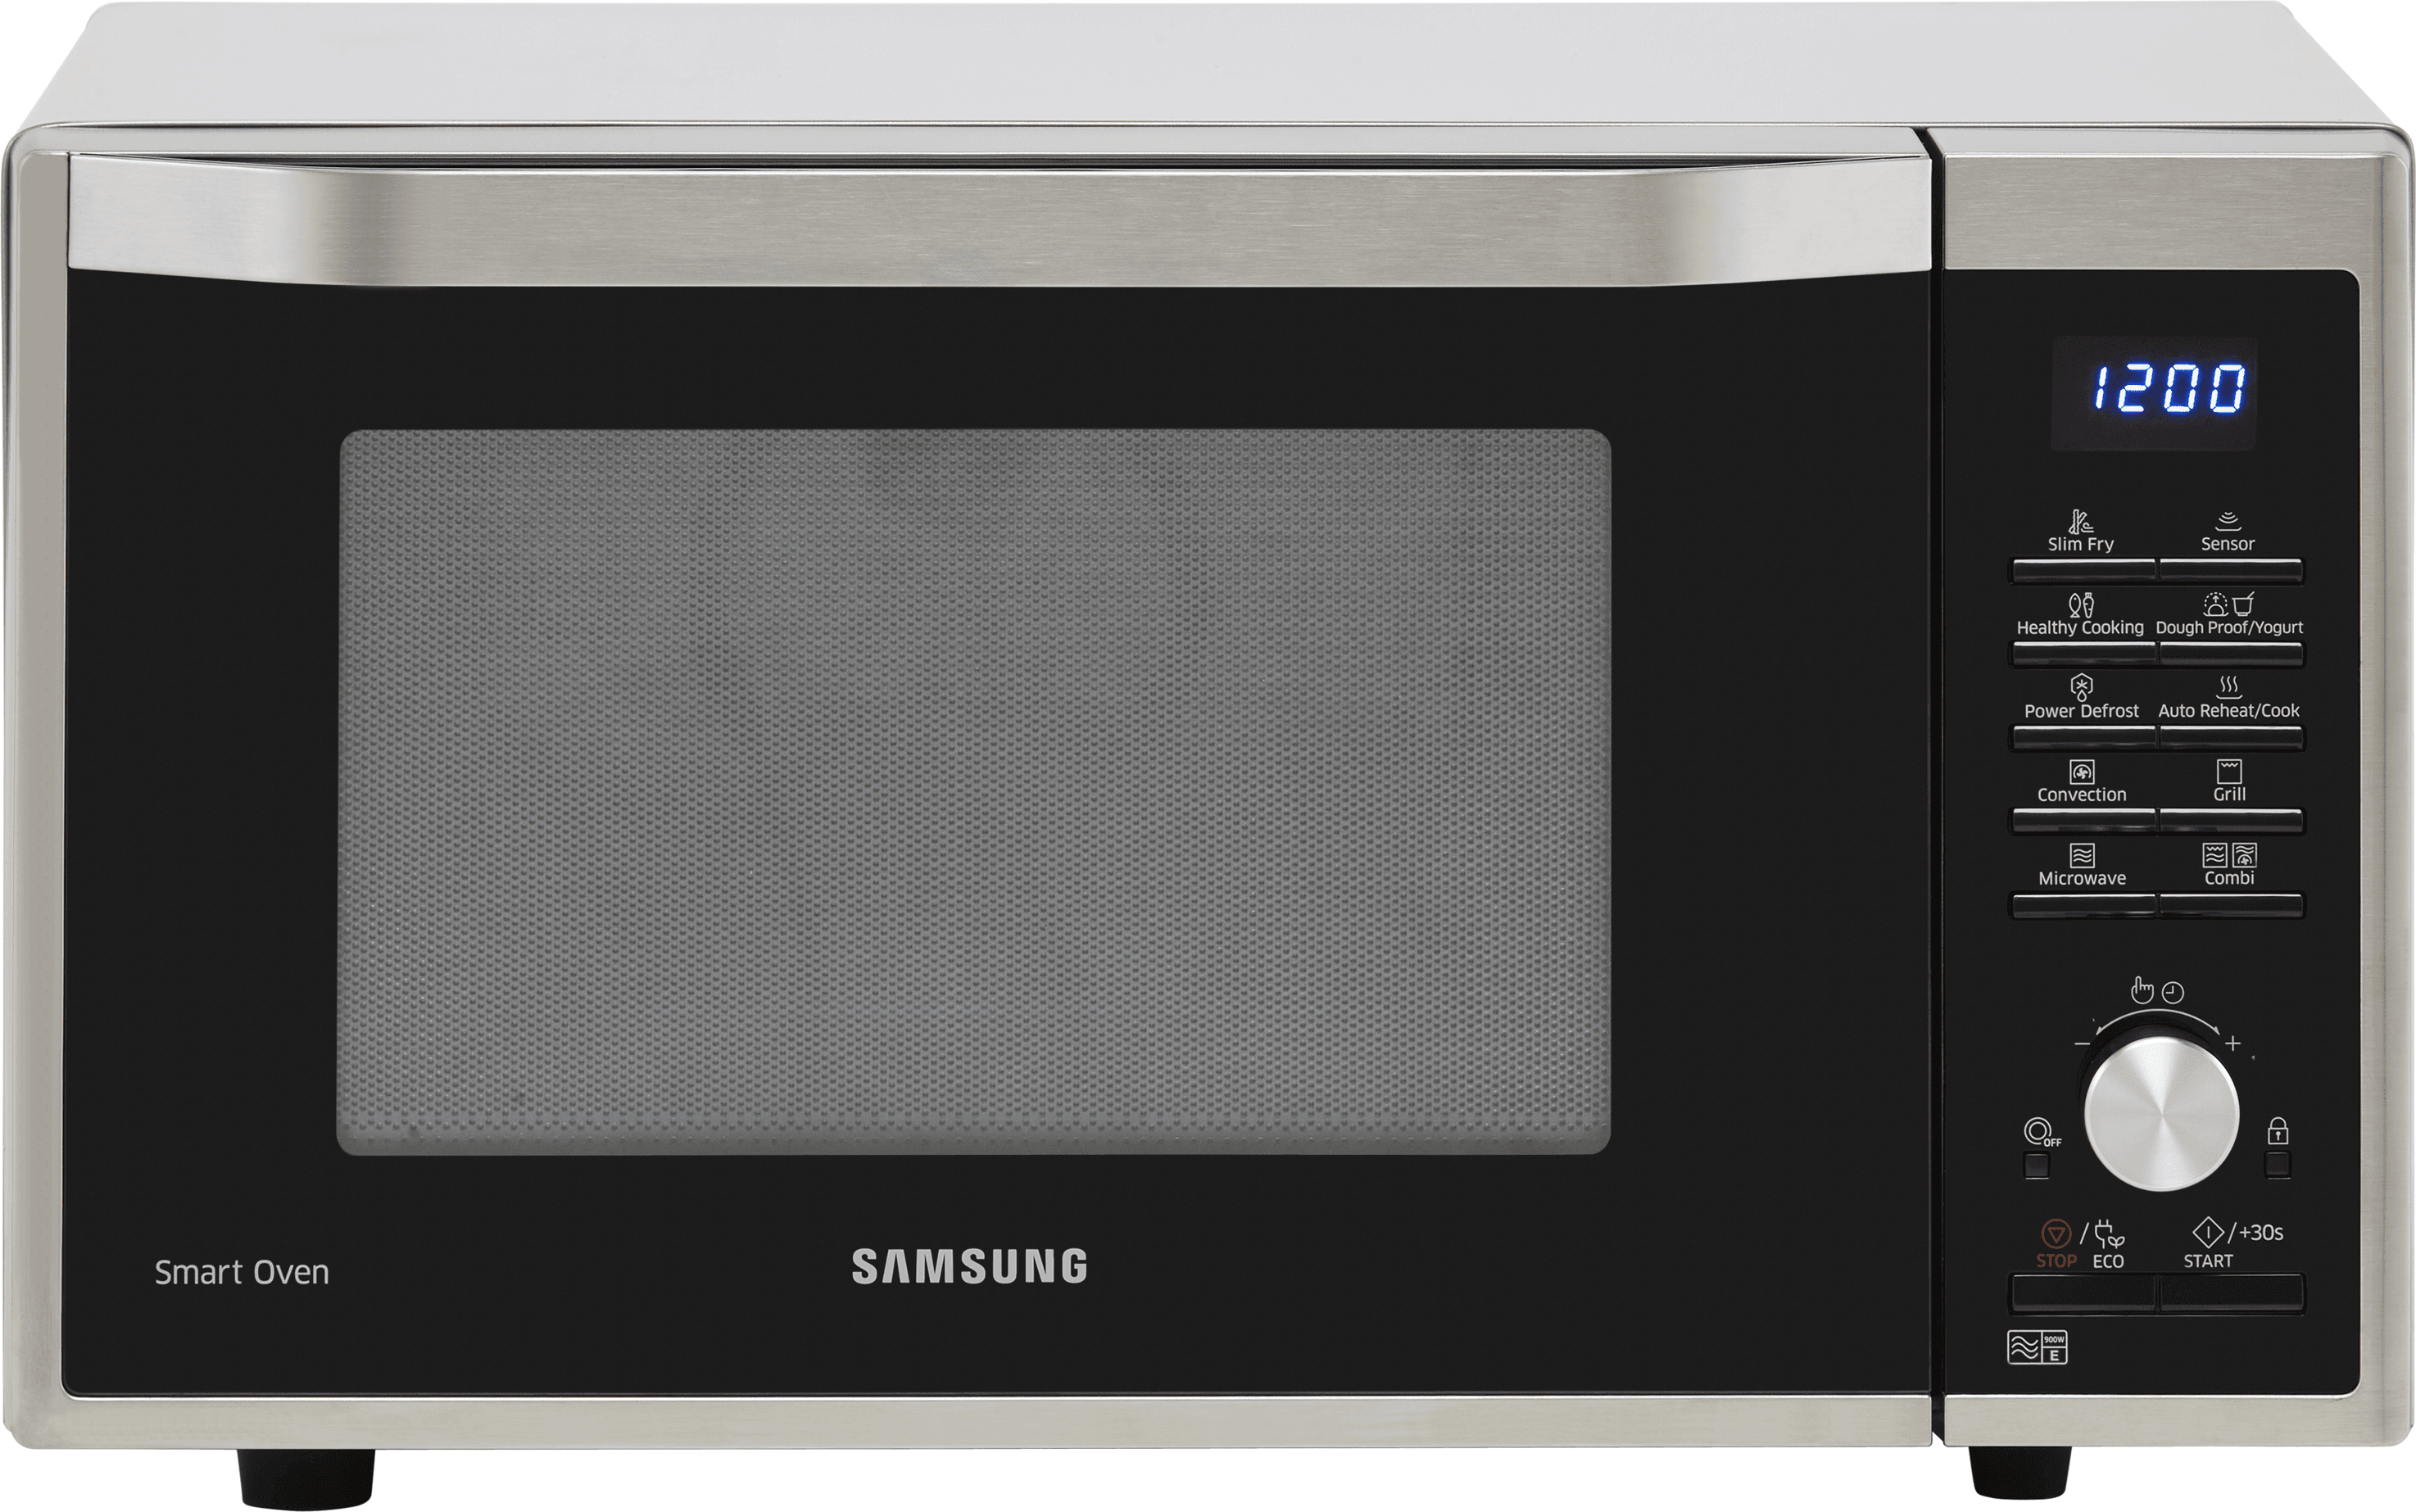 Samsung MC32J7055CT 31cm tall 52cm wide Freestanding Microwave - Stainless Steel Stainless Steel